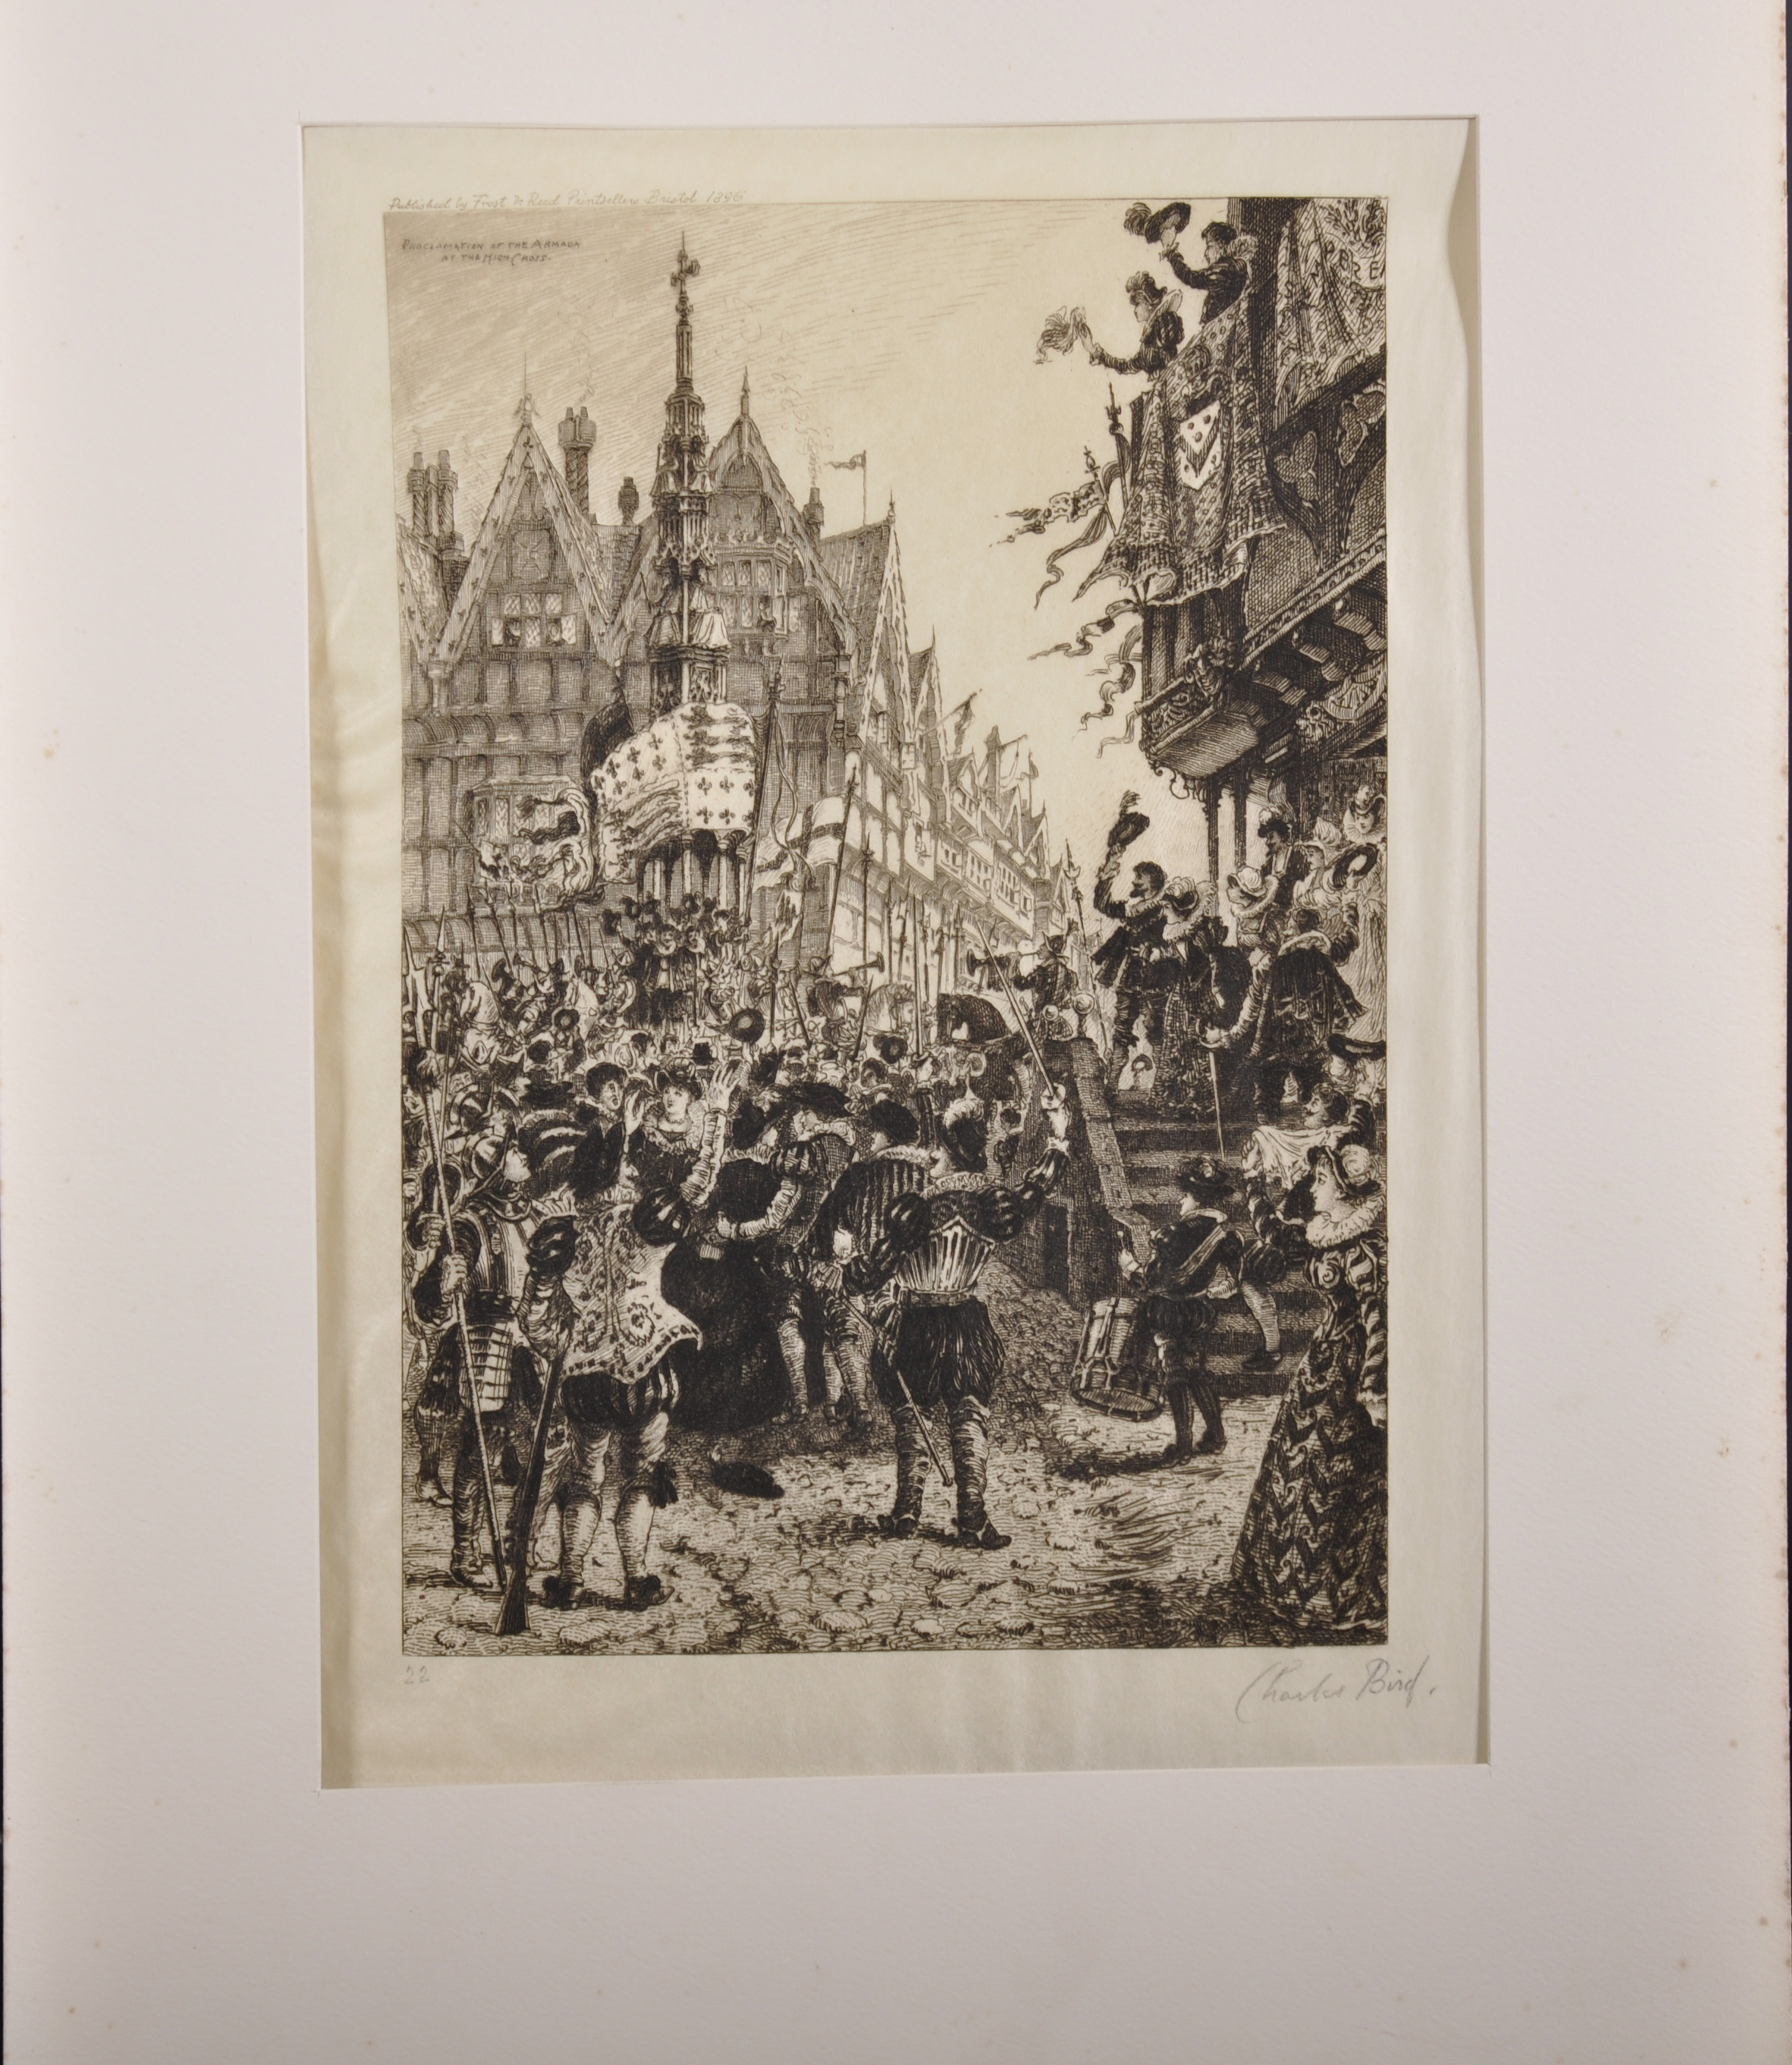 Charles Bird (act.1892-1907) British. "Historical Bristol", Etching, Signed in Pencil, 9.25" x 6. - Image 2 of 7